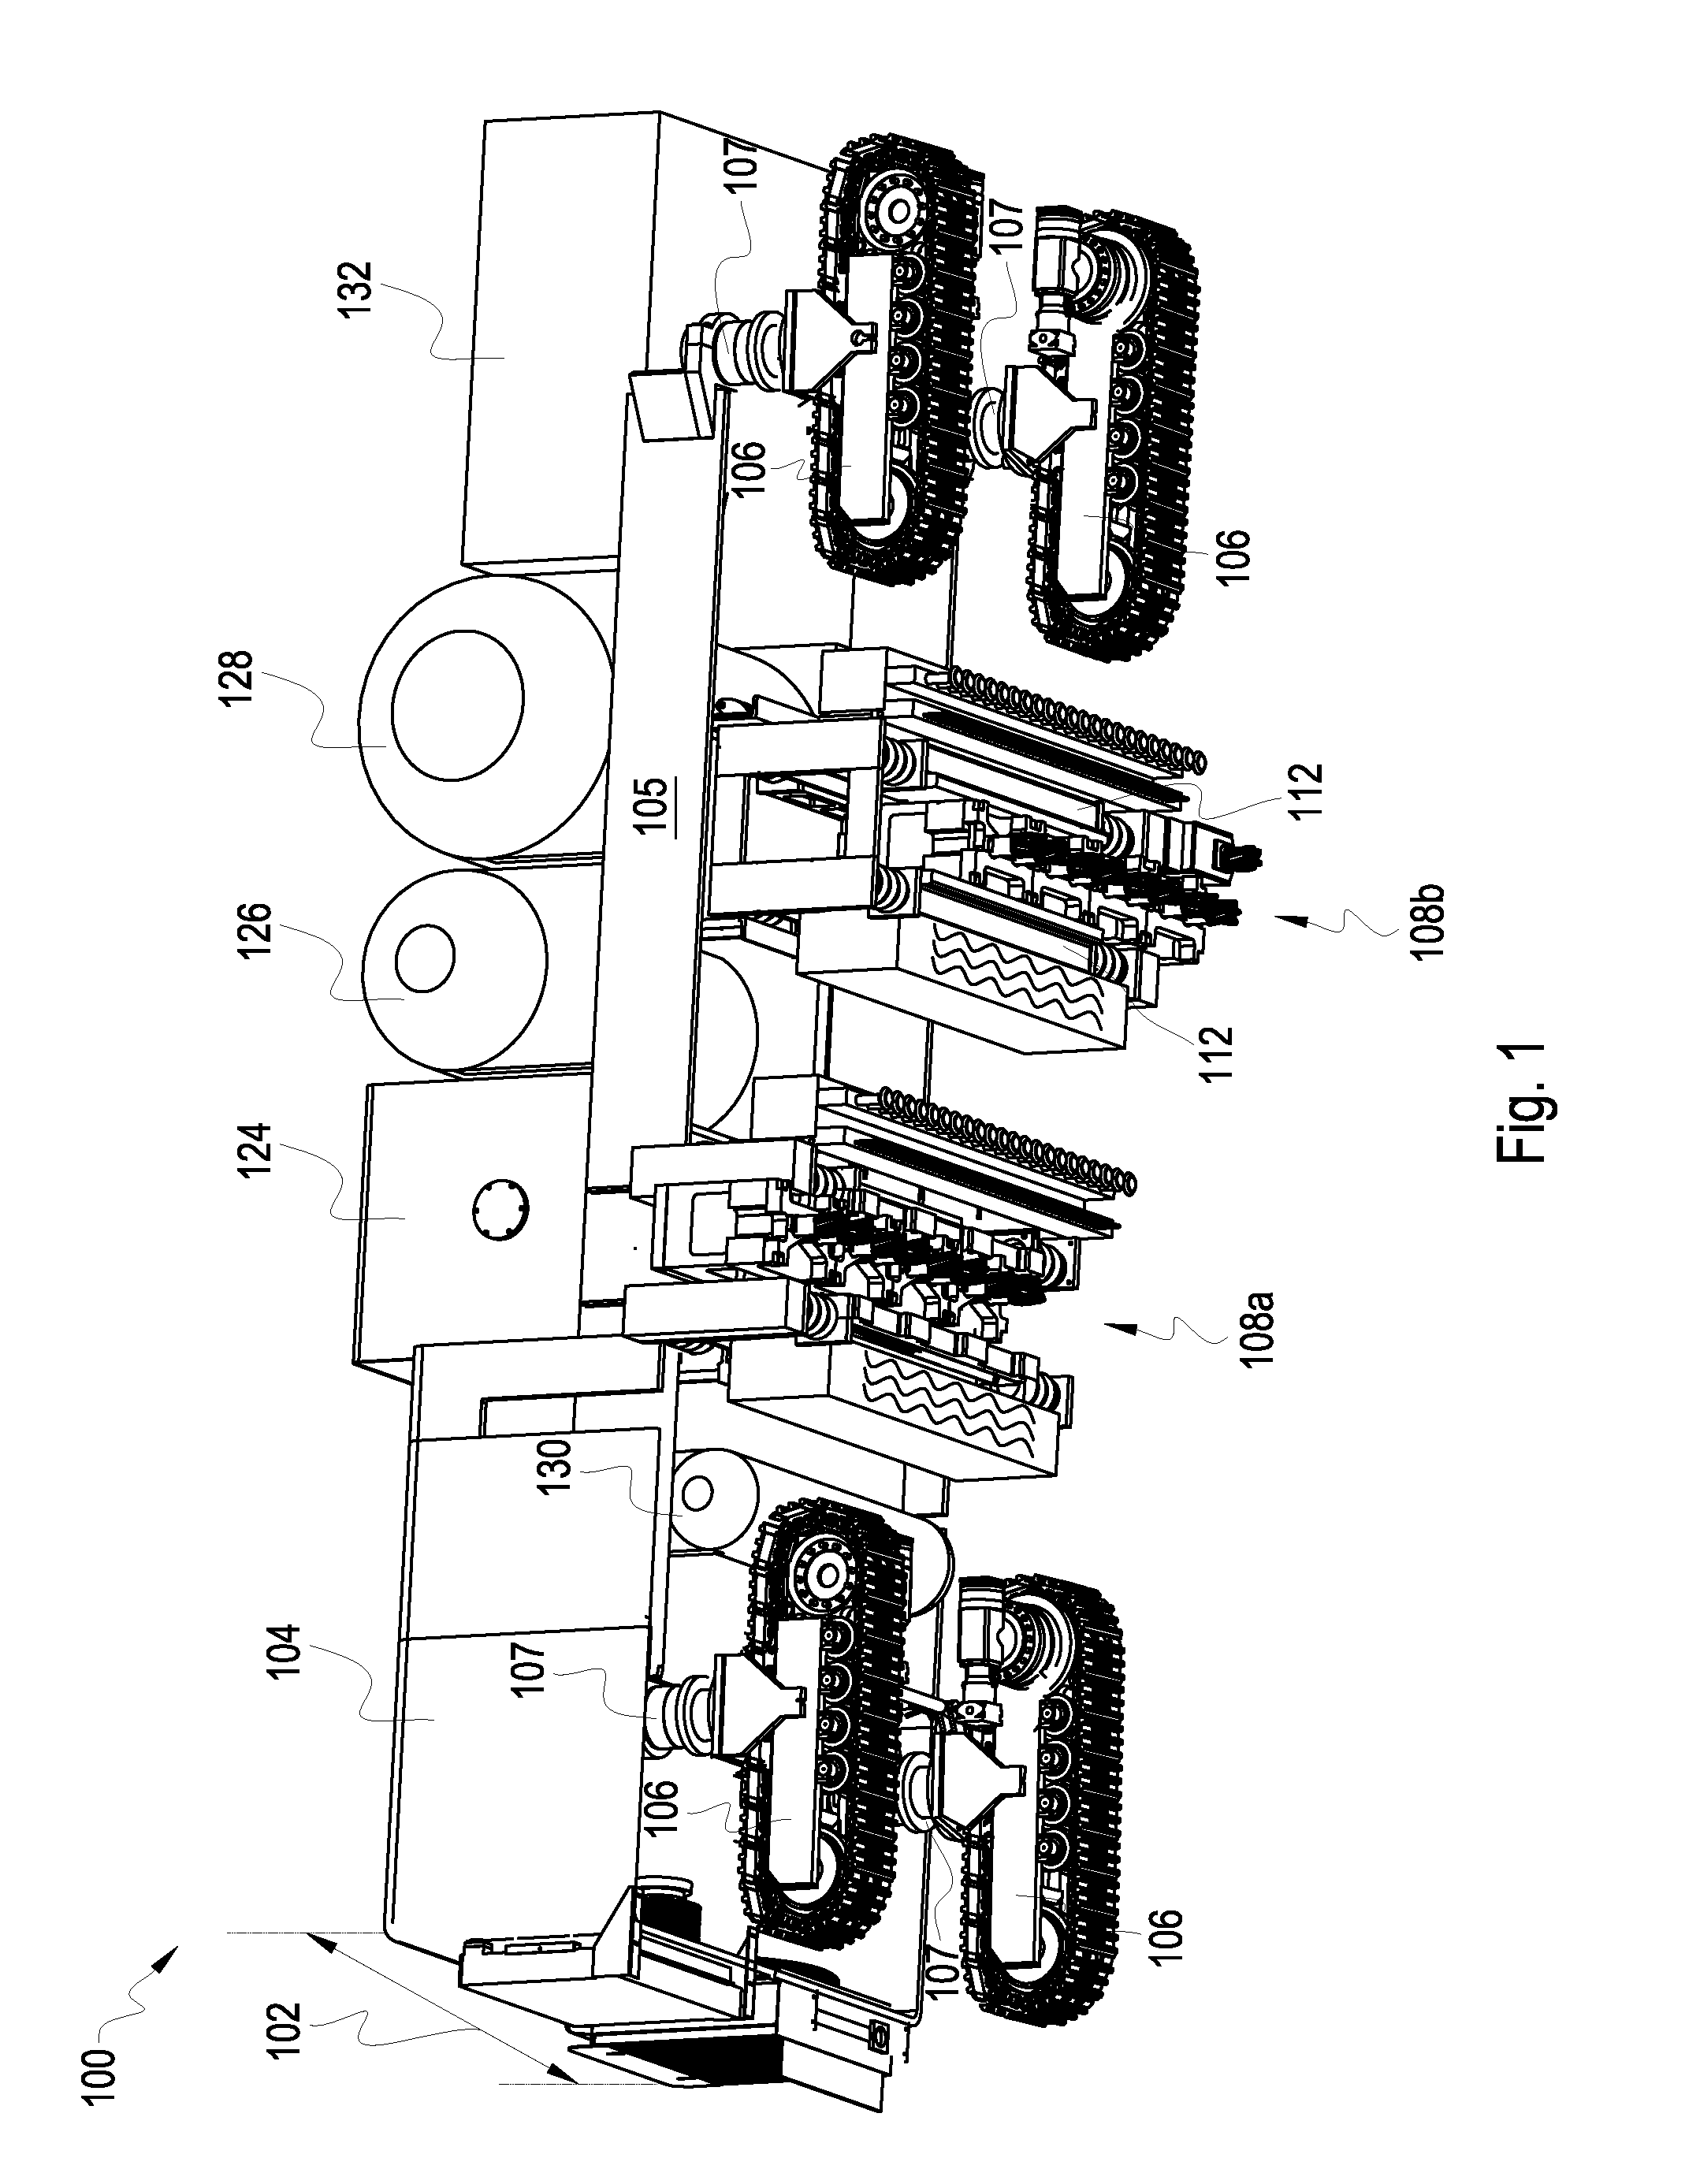 Method for Depositing Pavement Rejuvenation Material into a Layer of Aggregate